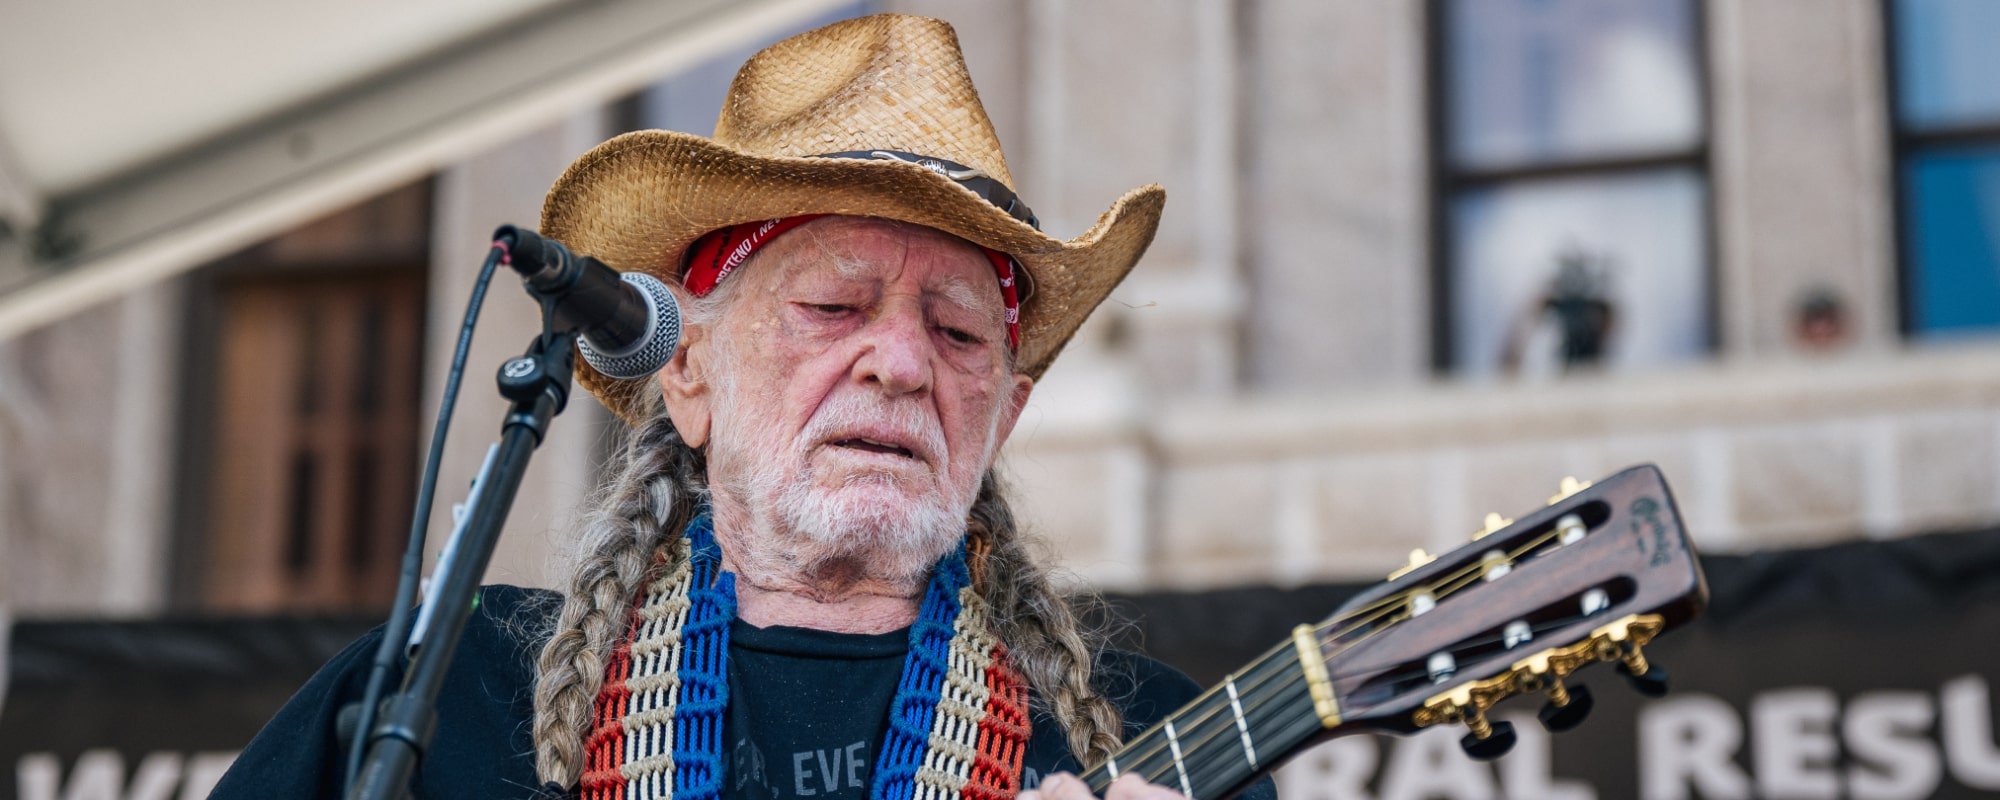 Watch Trailer for ‘Willie Nelson & Family’; Docuseries Gives Unflinching Look at Outlaw Country Legend’s Life, Legacy